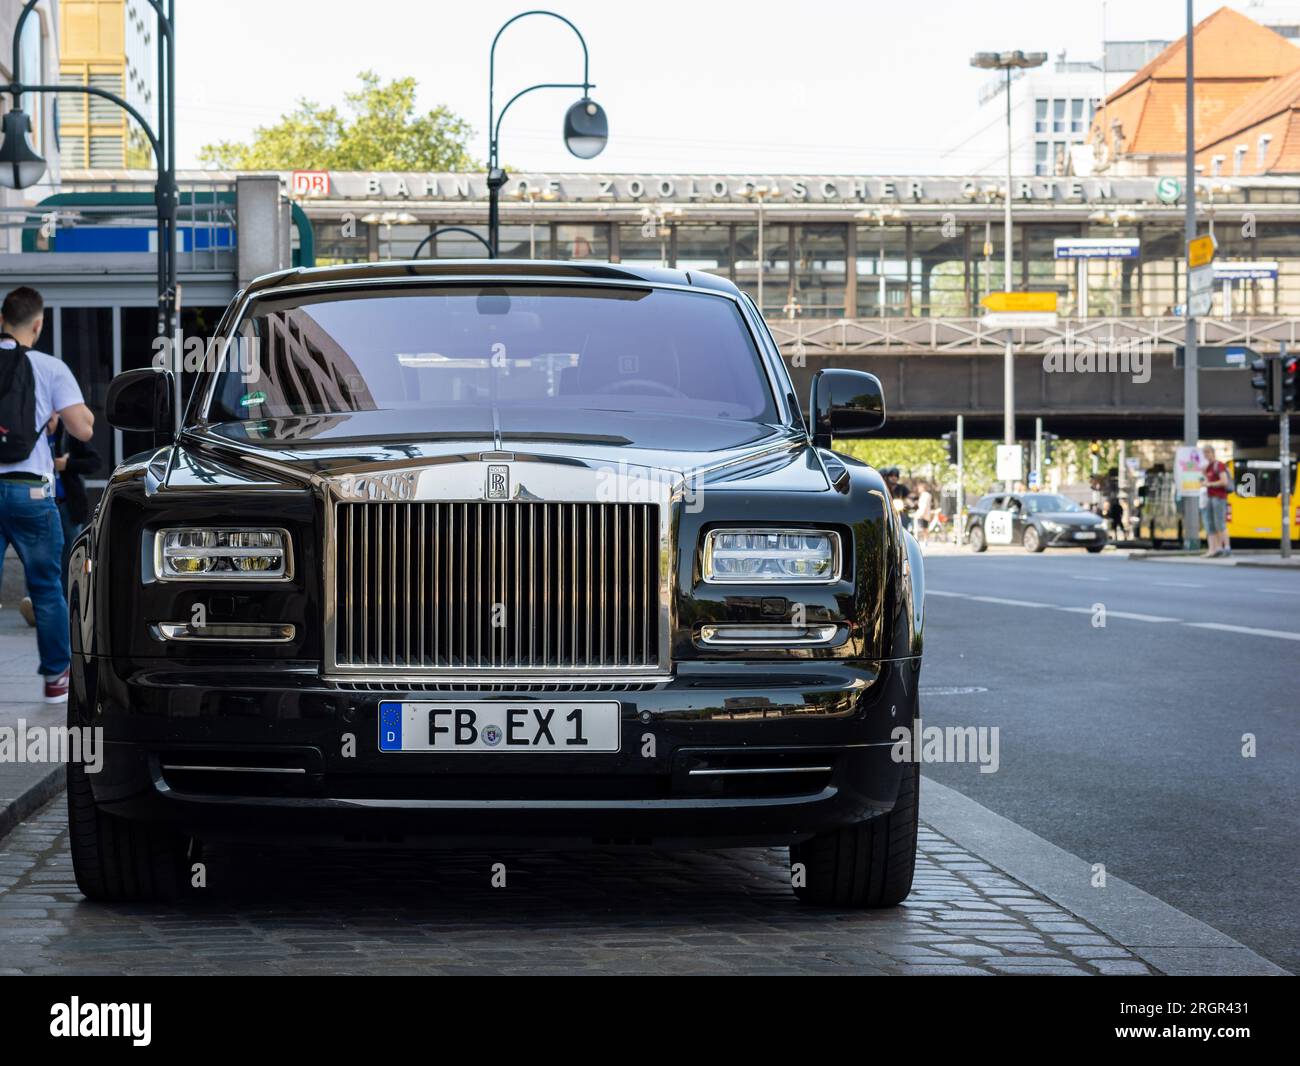 Rolls Royce Phantom luxury car parking next to the street. The black shiny limousine in empty. Buildings of the public transport are in the background Stock Photo